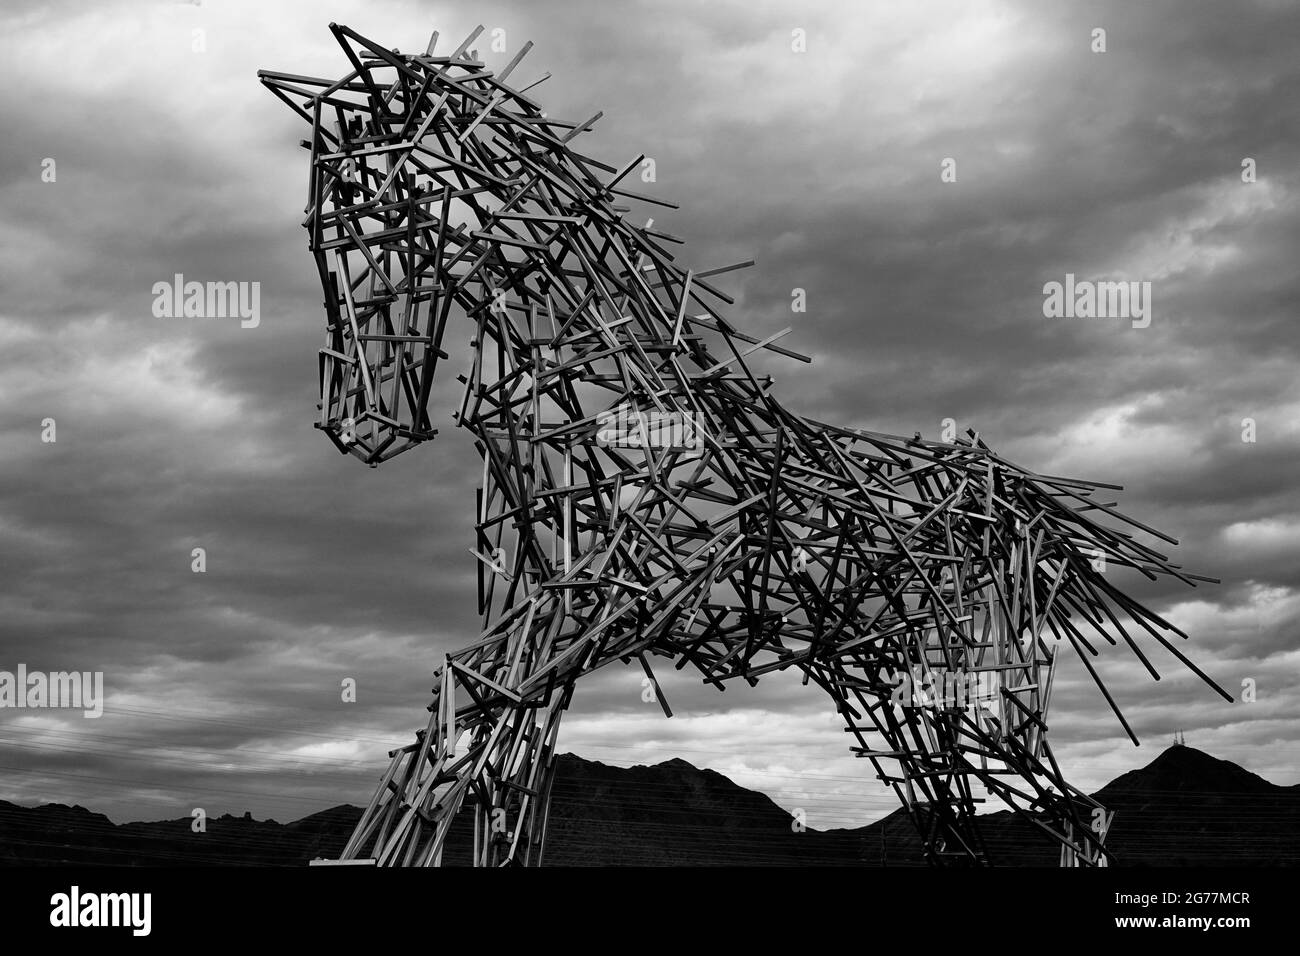 A black and white photo of a statue of a steel iron horse on a cloudy day in Scottsdale, Arizona Stock Photo